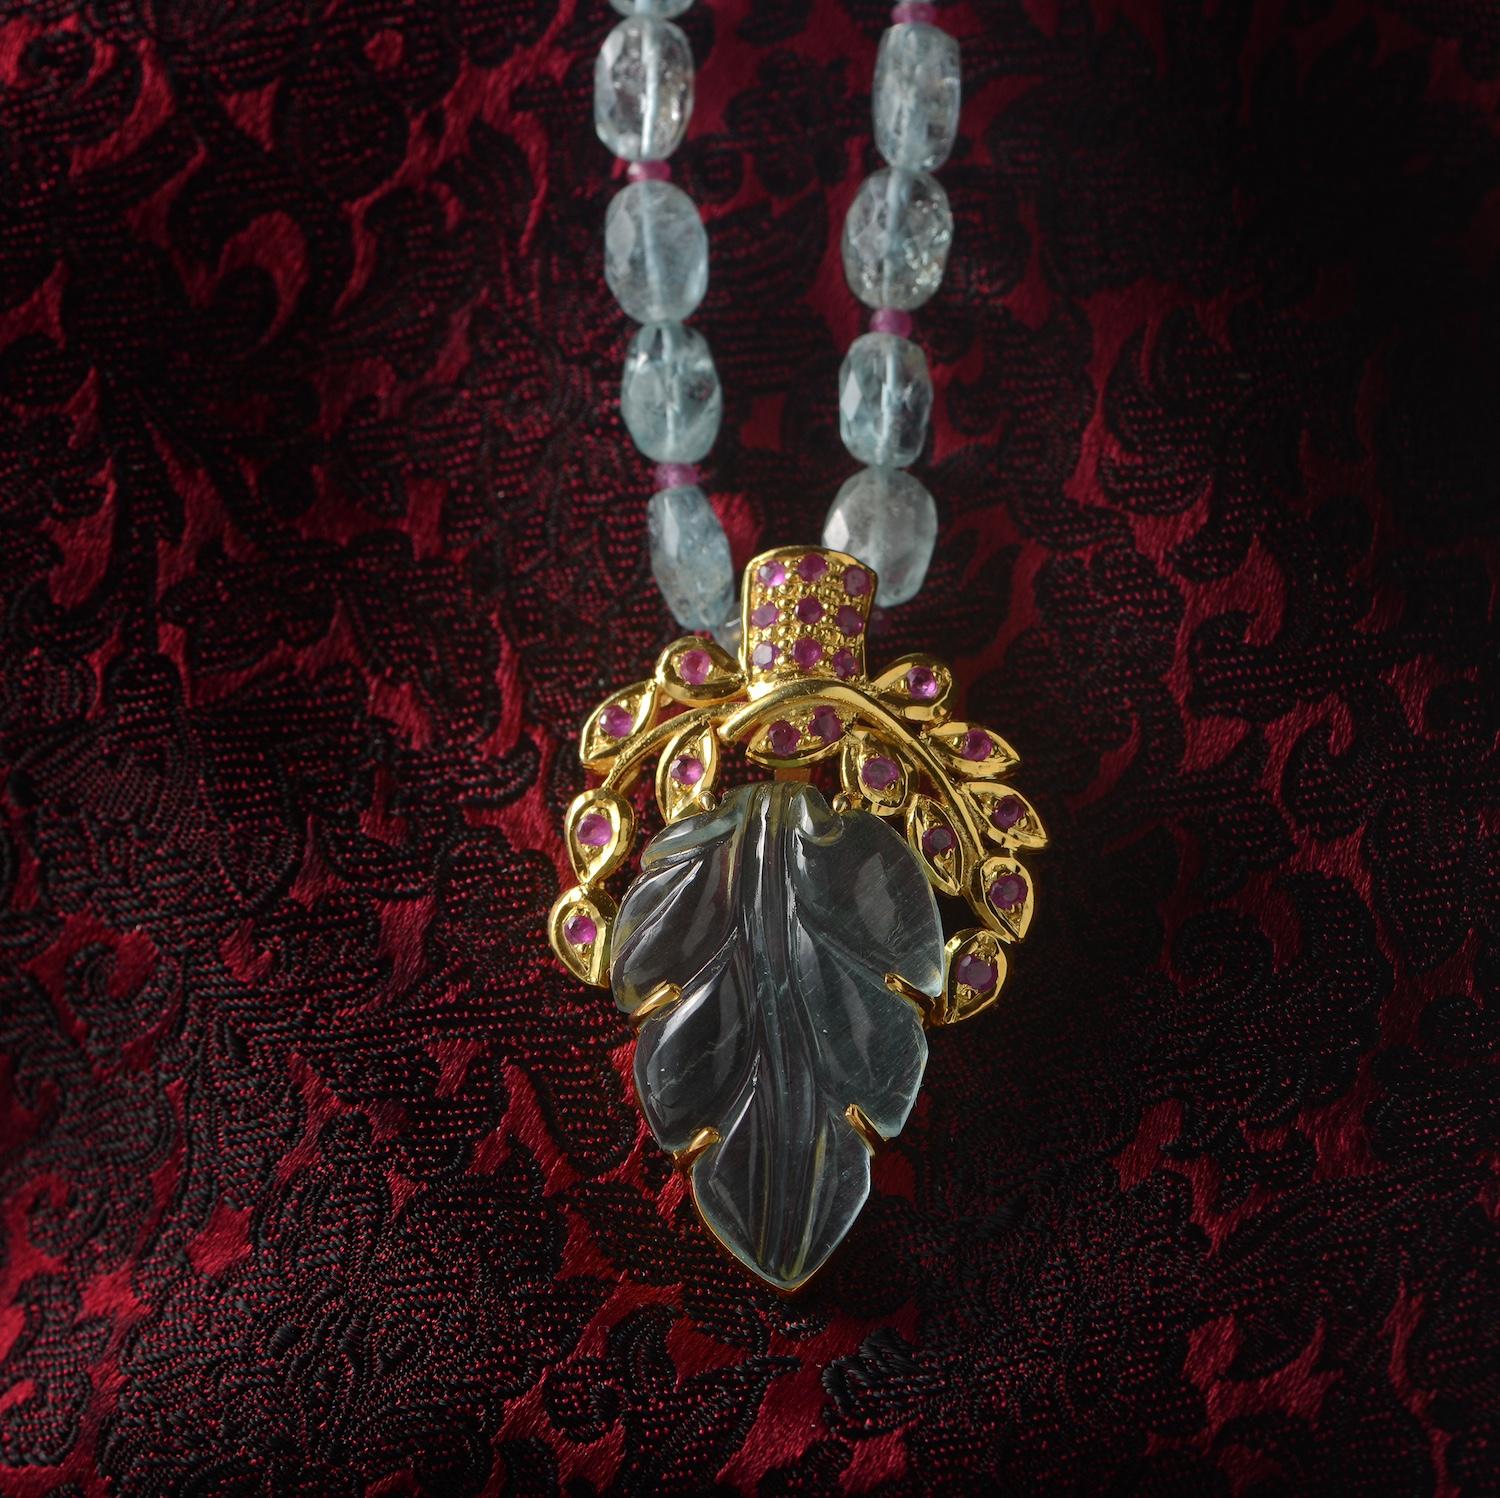 Using the ancient art of stone-carving, this one-of-a-kind aquamarine pendant has been hand-carved and hand-engraved in our workshops. Made in sterling silver coated with 24ct gold vermeil, it is embedded with rubies. It comes with a 28 inch